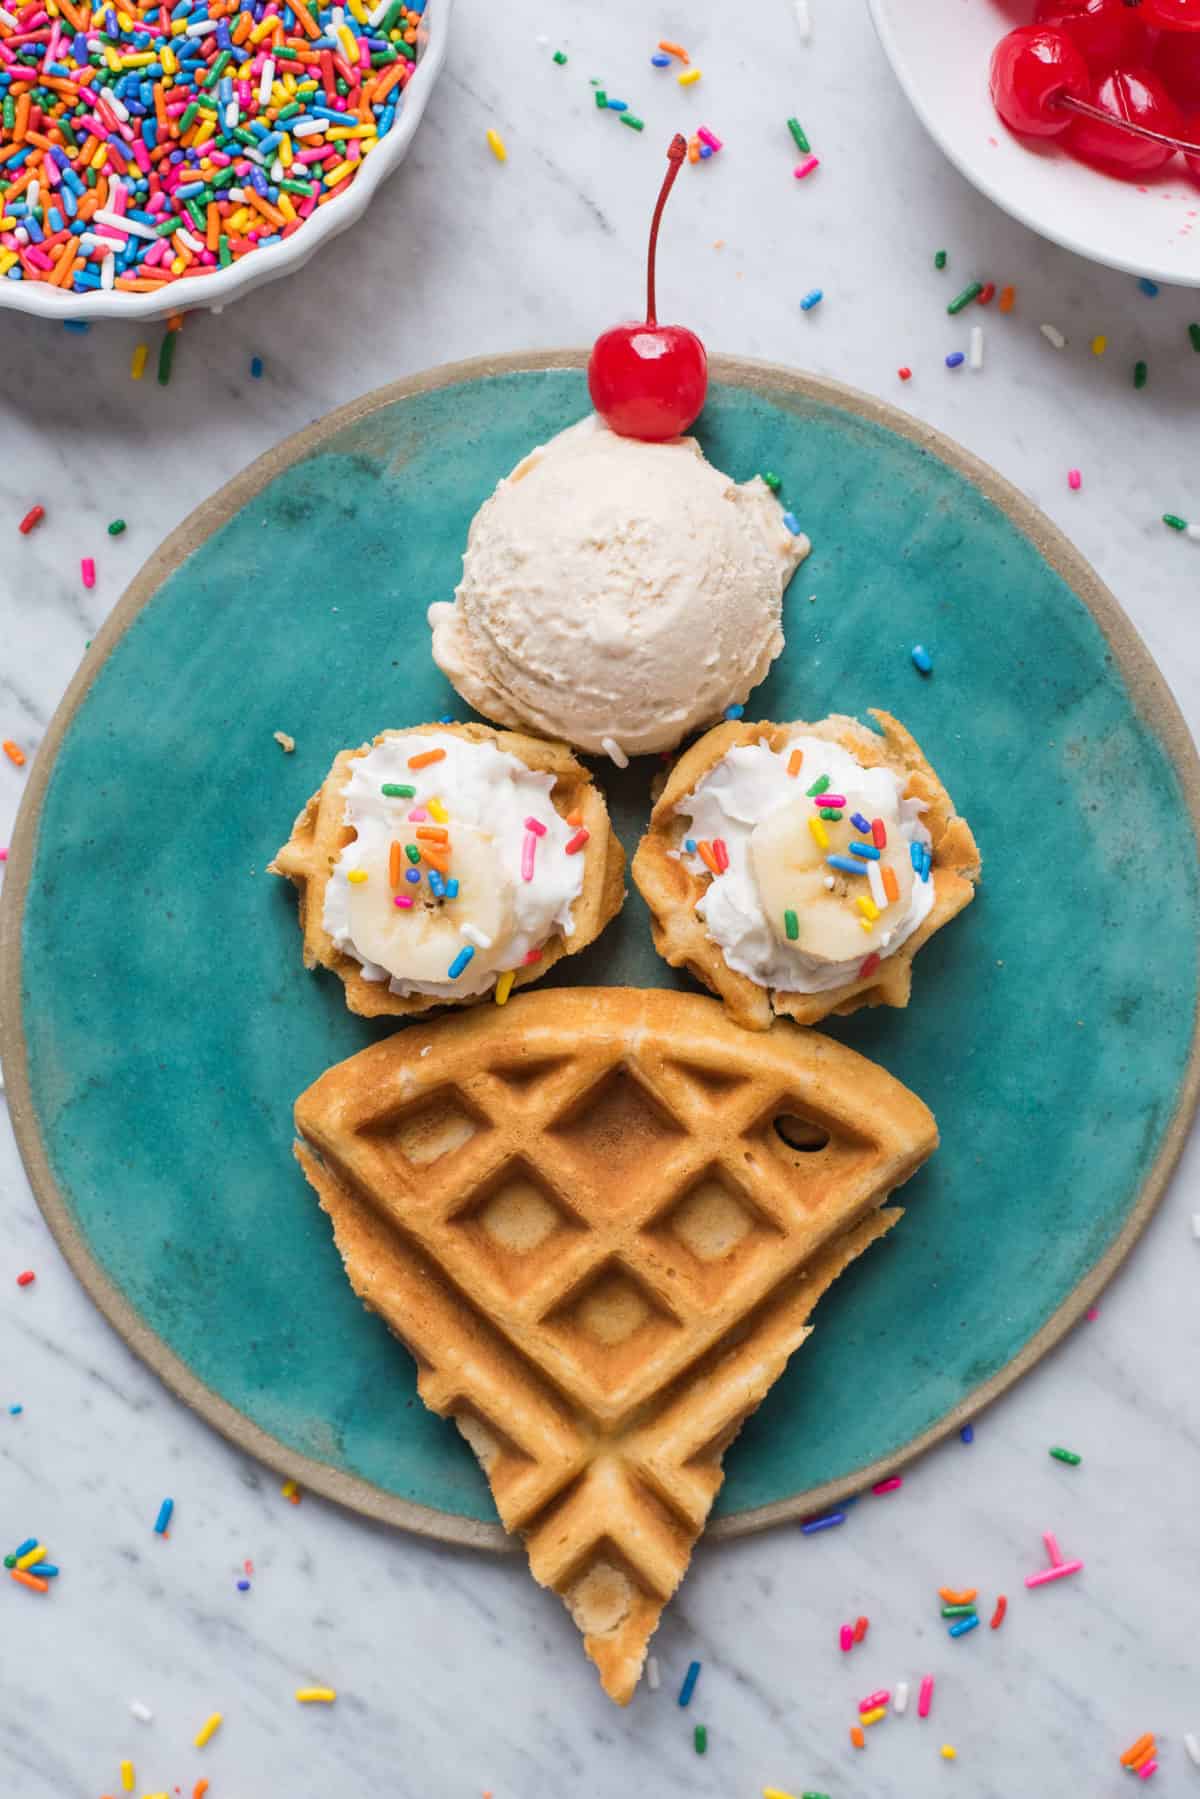 waffles cut and arranged in the shape of an ice cream cone on teal plate on white background